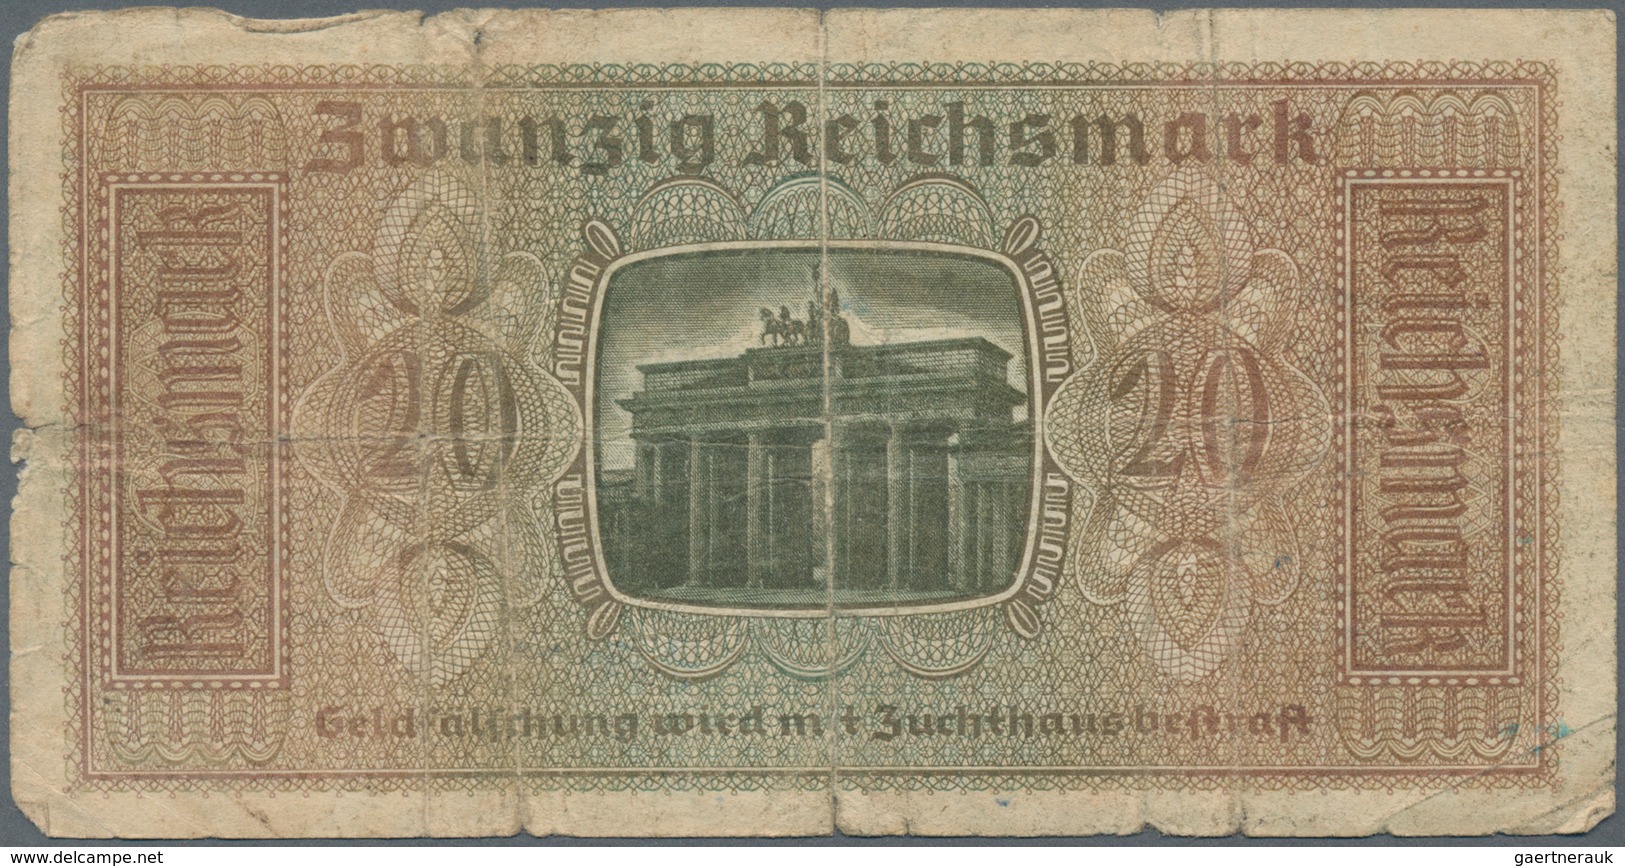 Alle Welt: Small box with about 1000 banknotes, including some better notes in mainly F to VF condit